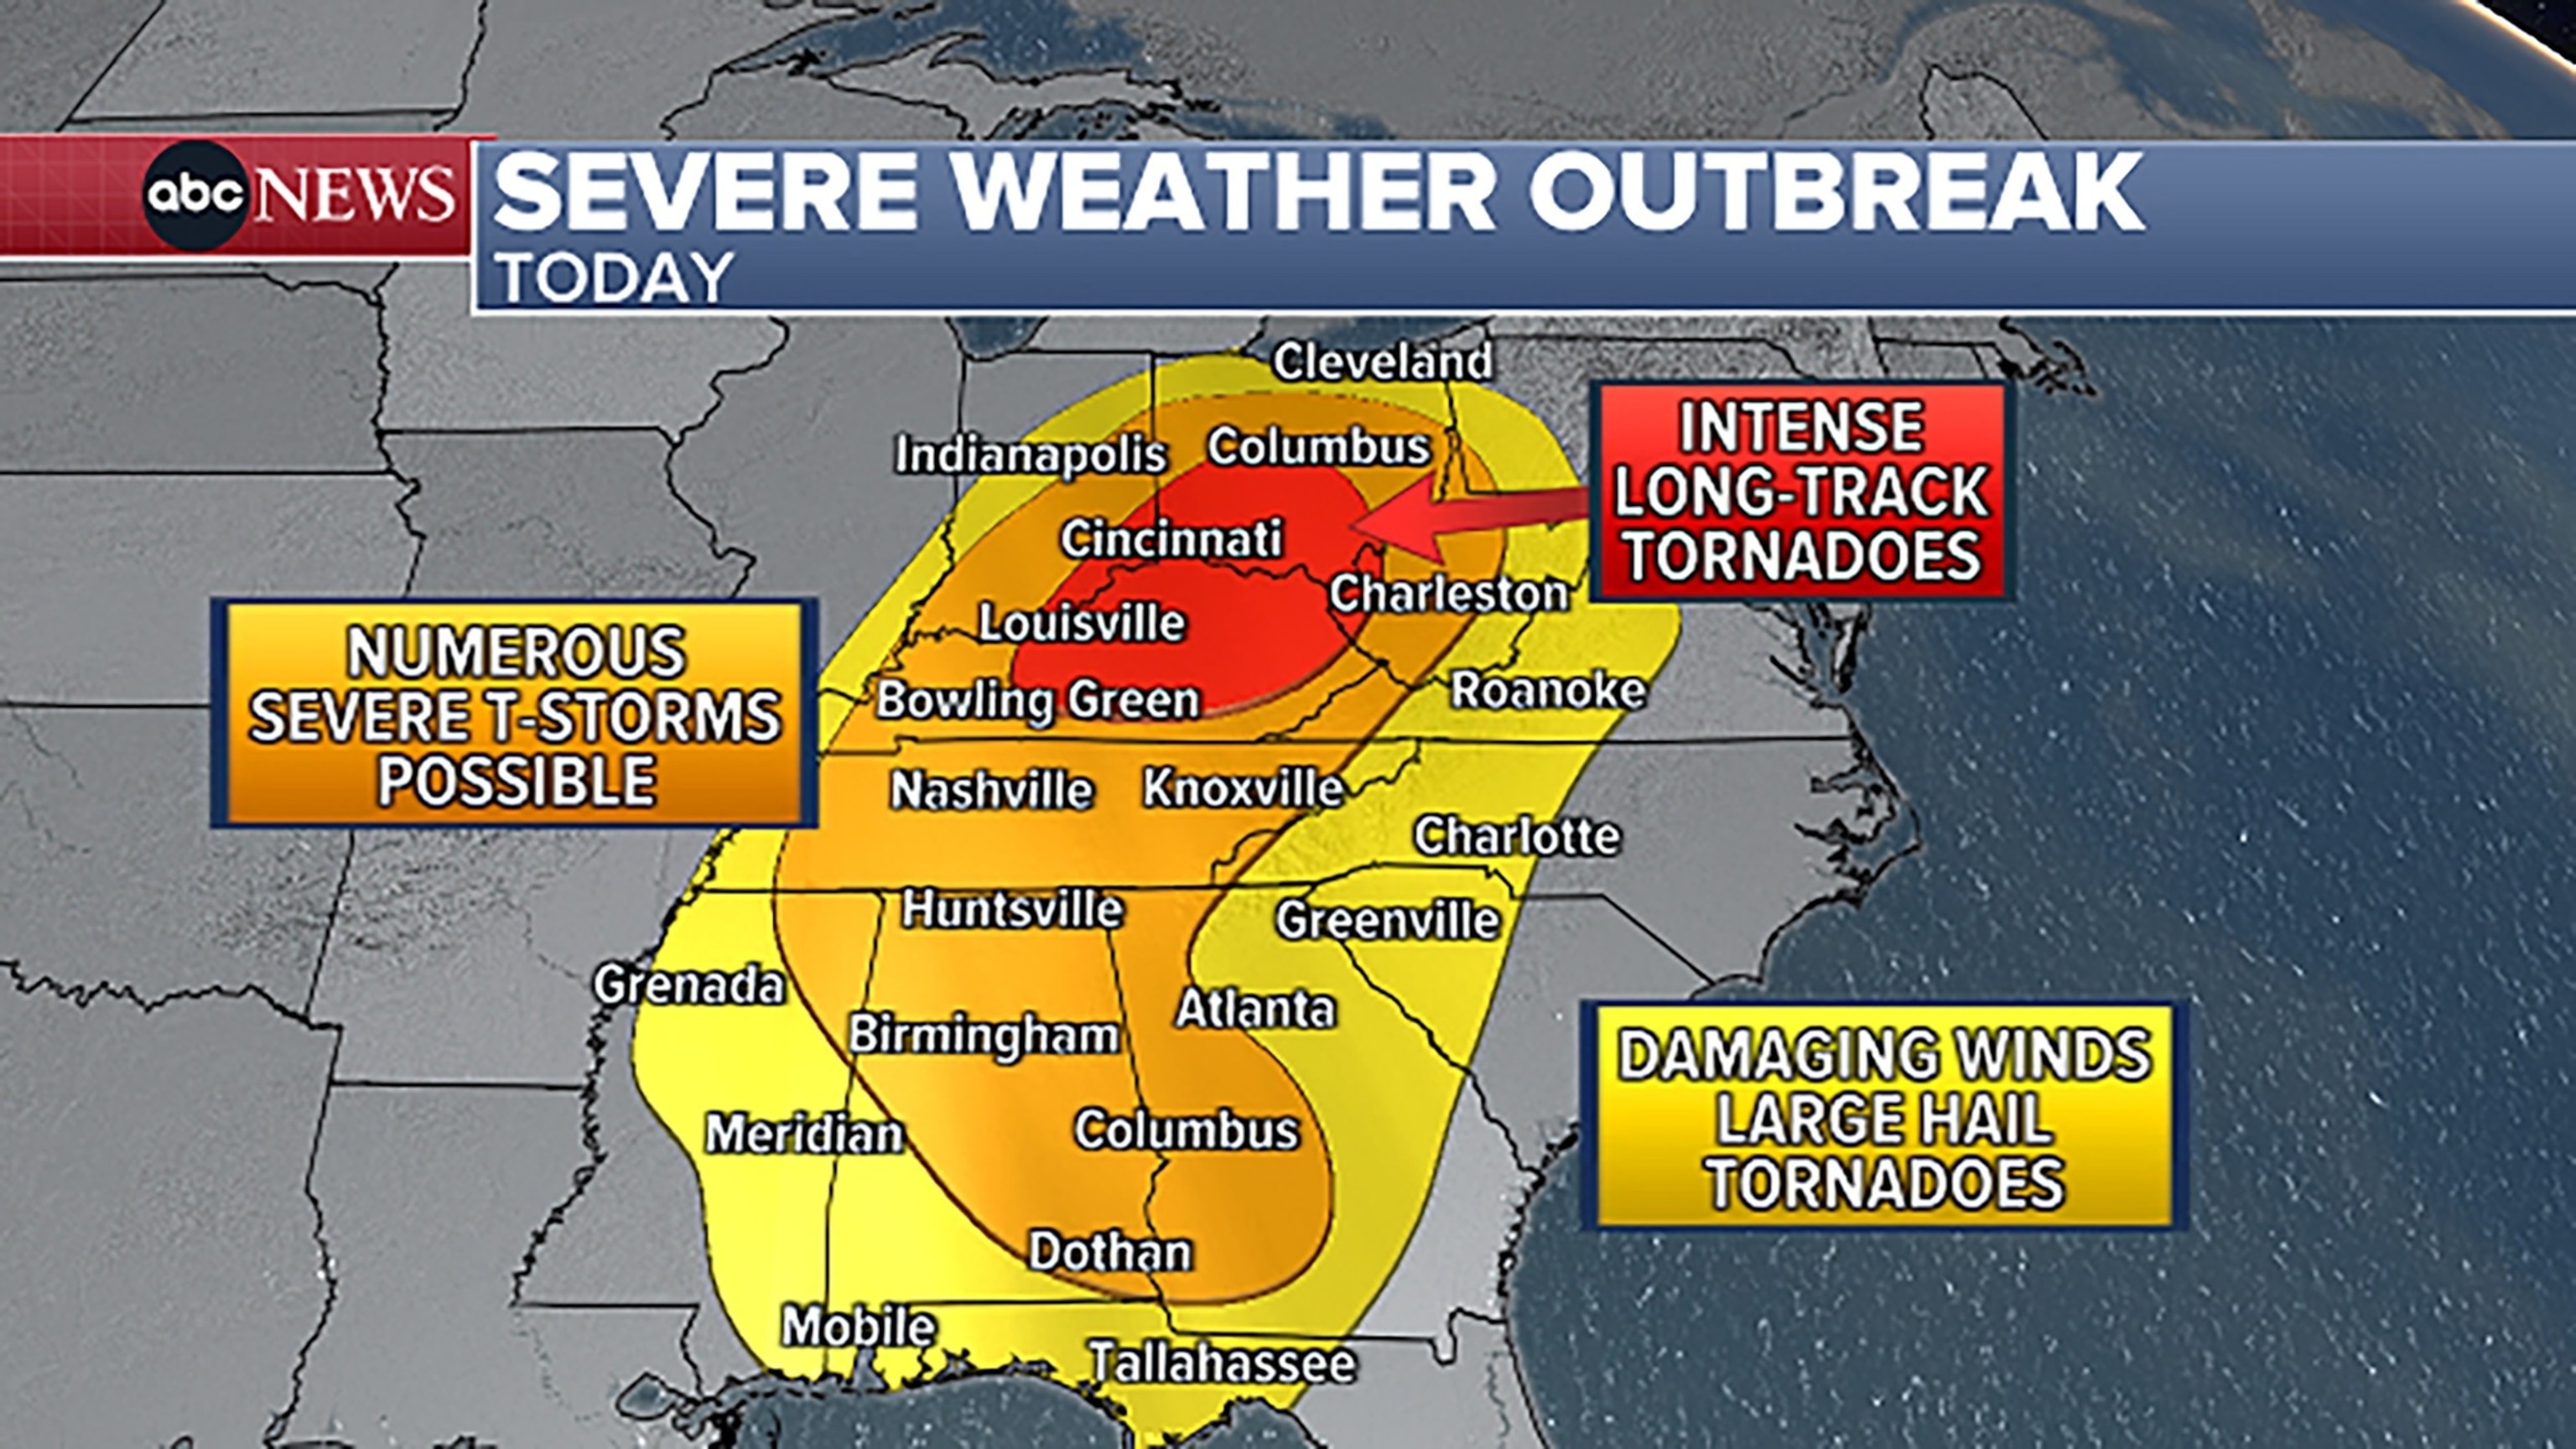 PHOTO: Severe weather outbreak.